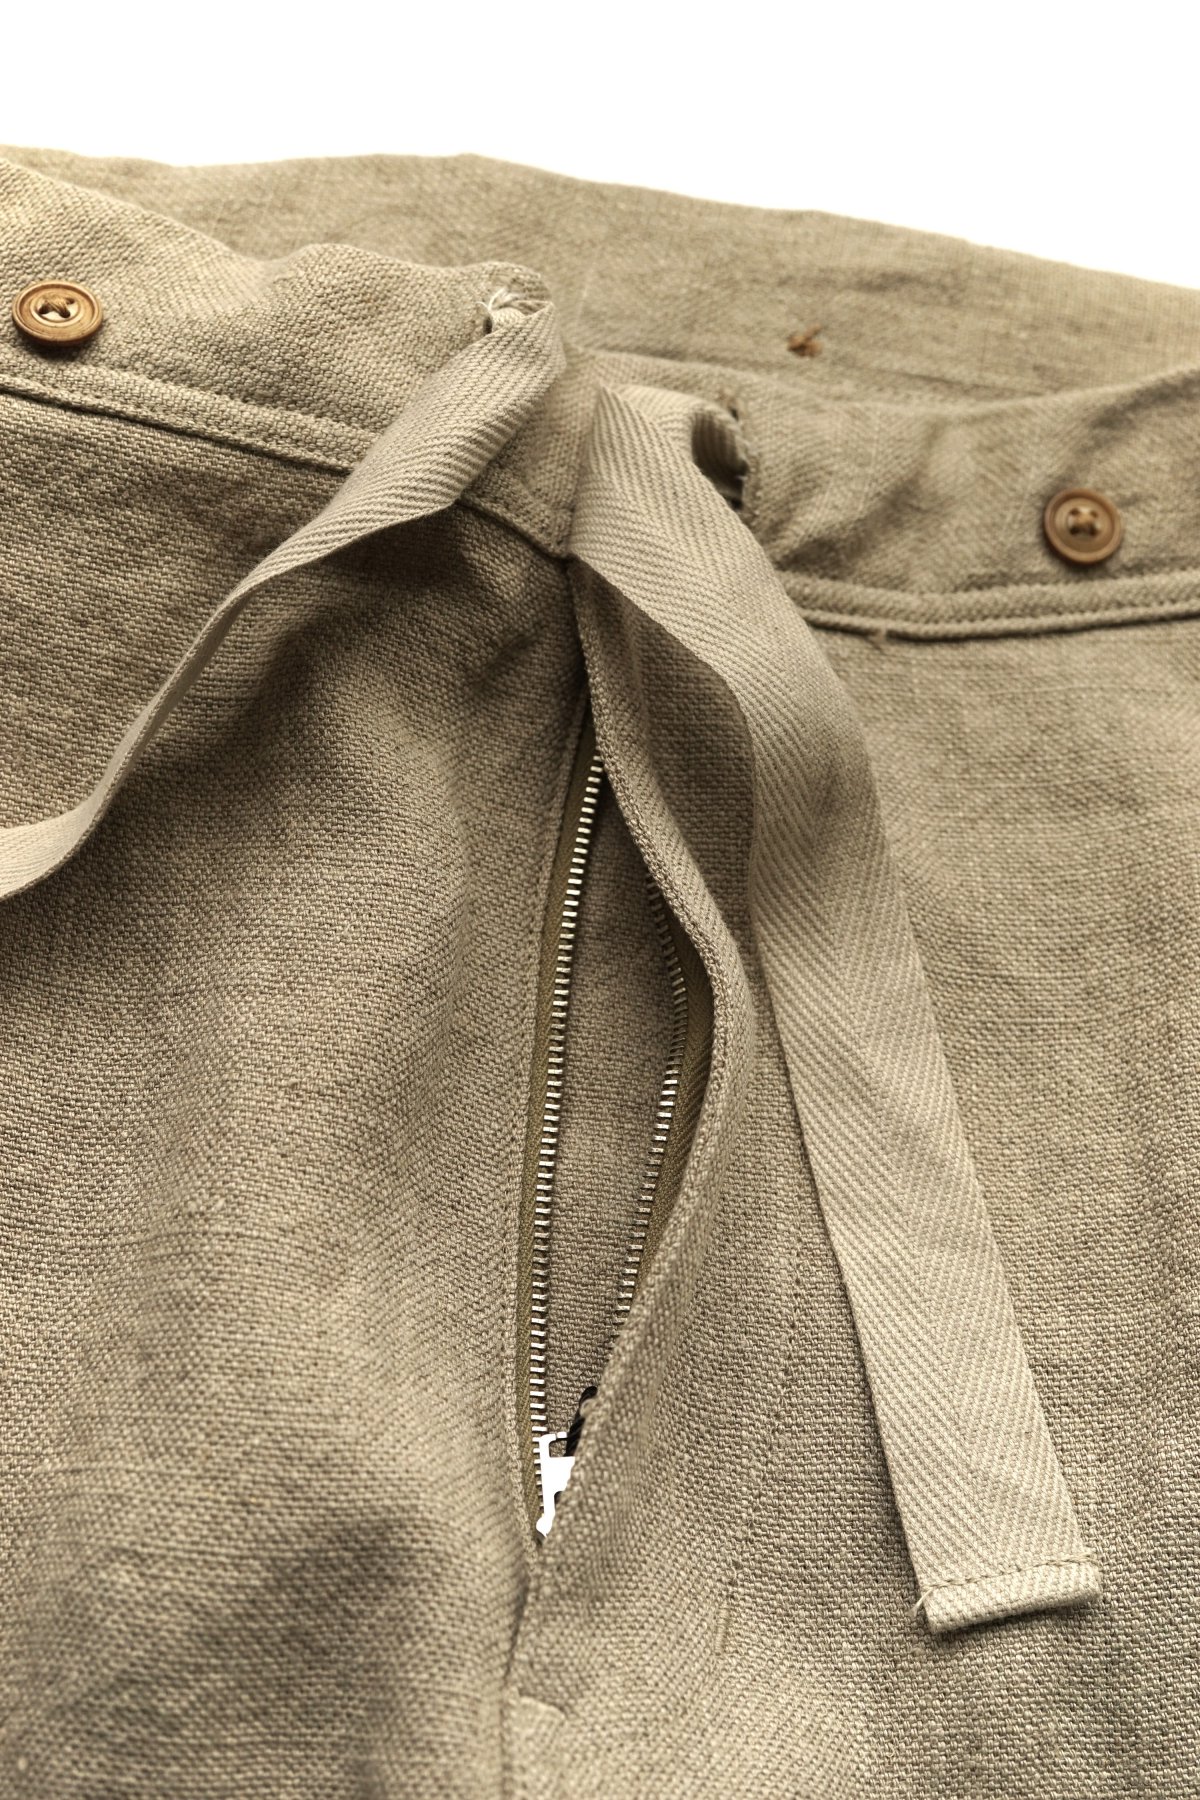 Nigel Cabourn ナイジェルケーボン 通販 正規店 フェートン - Phaeton Smart Clothes Online Store